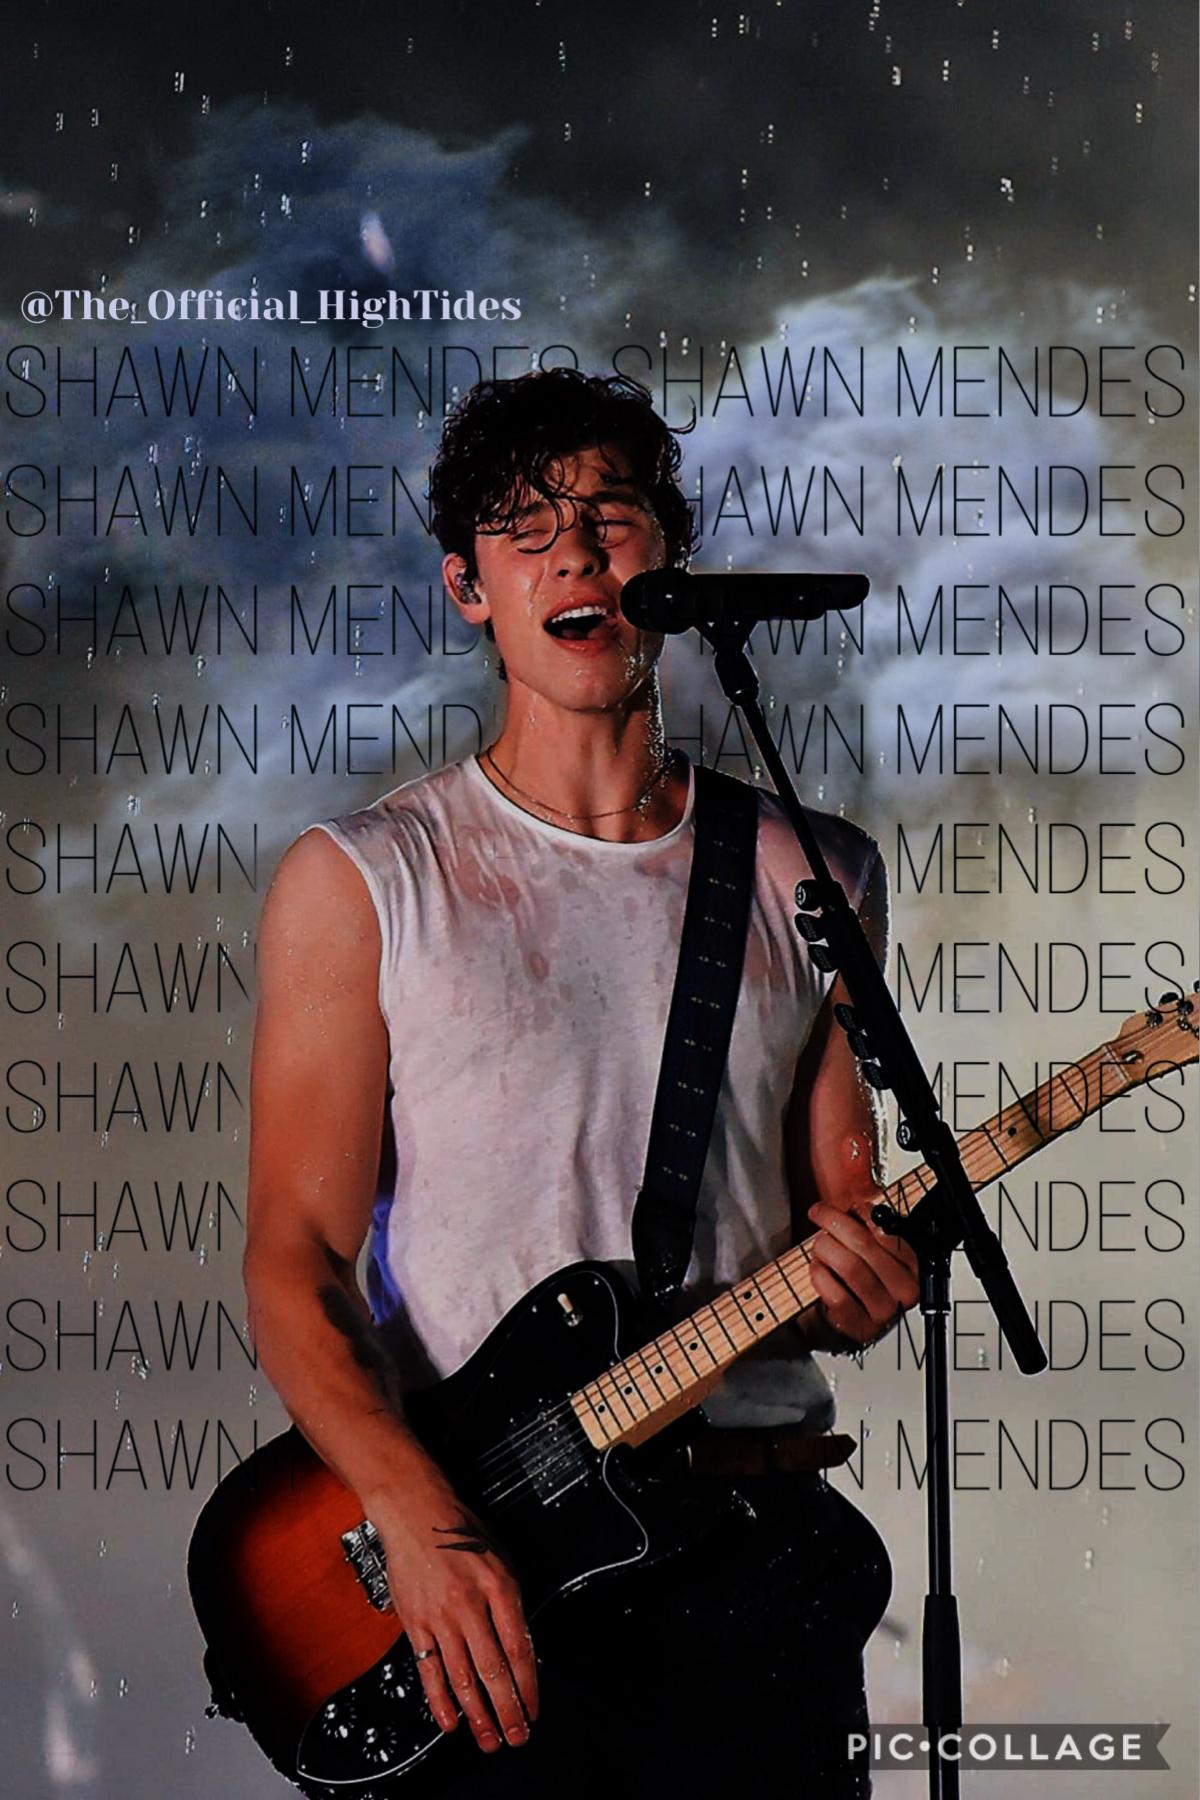 Oct. 10,2020 TAP💙💜🖤

hi! I’ve been MIA sorry:( Love Shawn Mendes btw lol